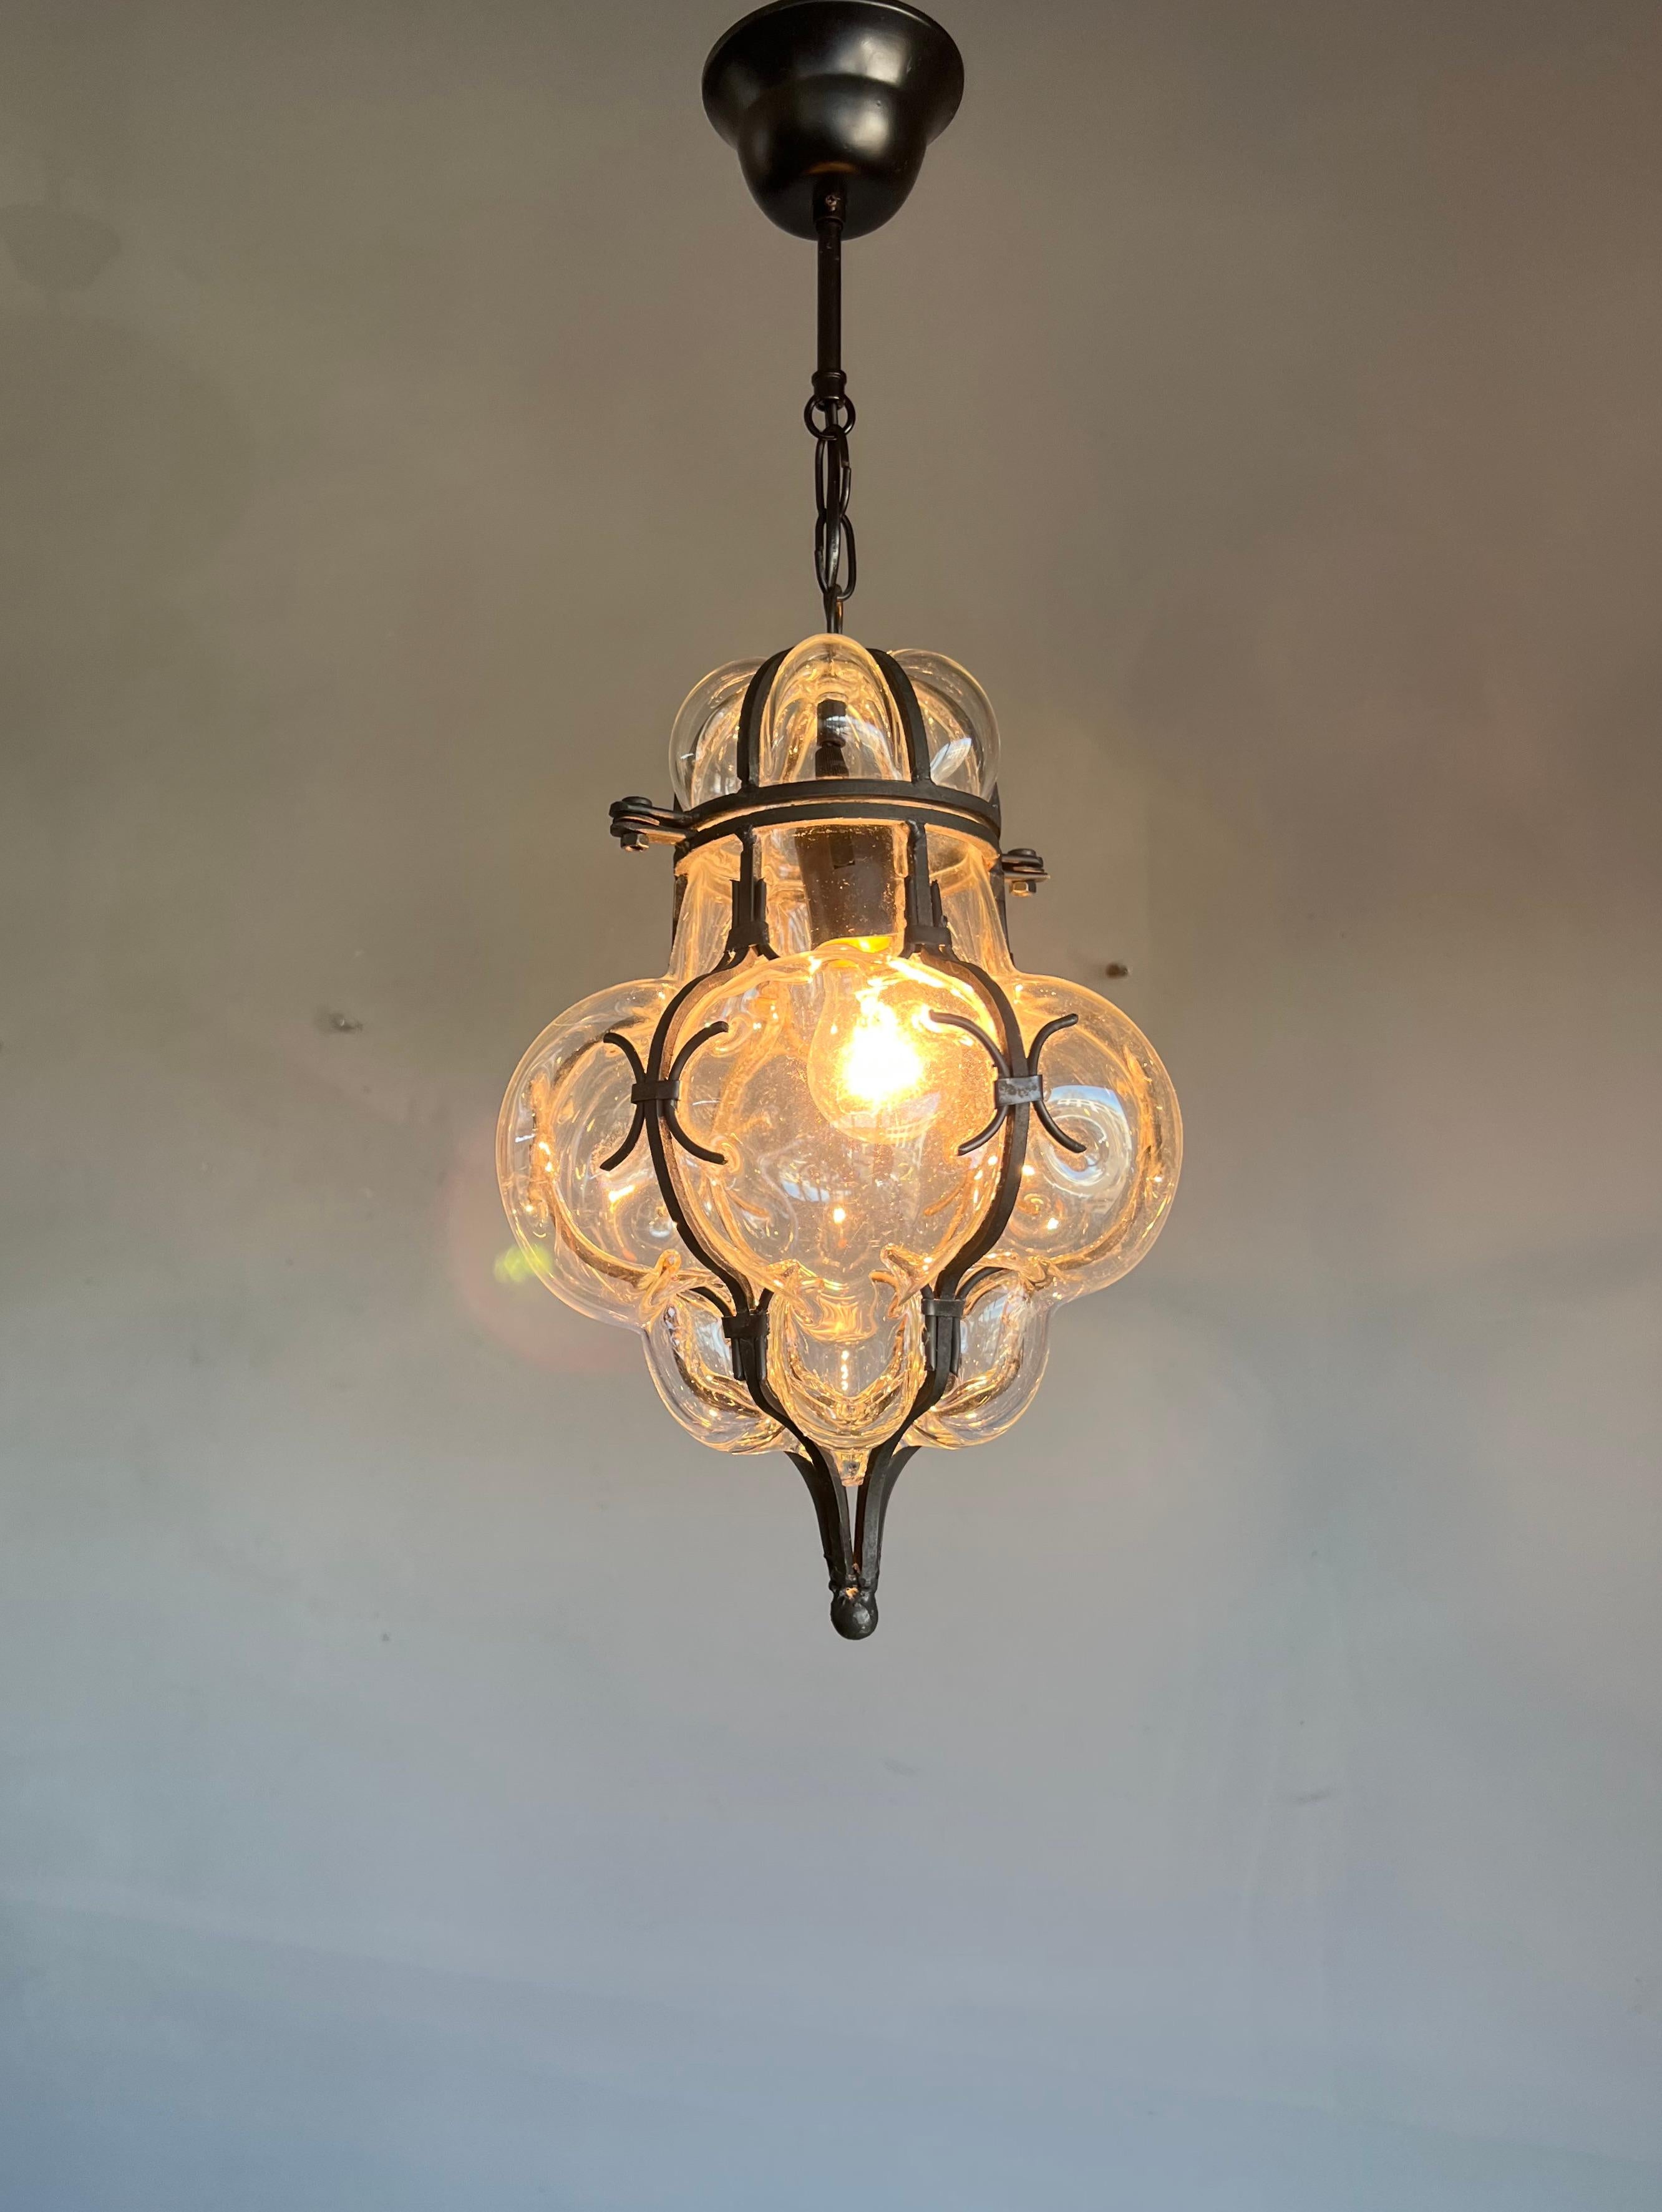 These handcrafted and stylish pendants are in near-mint condition.

This pair of single light, Italian pendants is very beautiful, both in shape and in color. The stunning clear glass is mouth-blown into hand forged, wrought iron frames and the